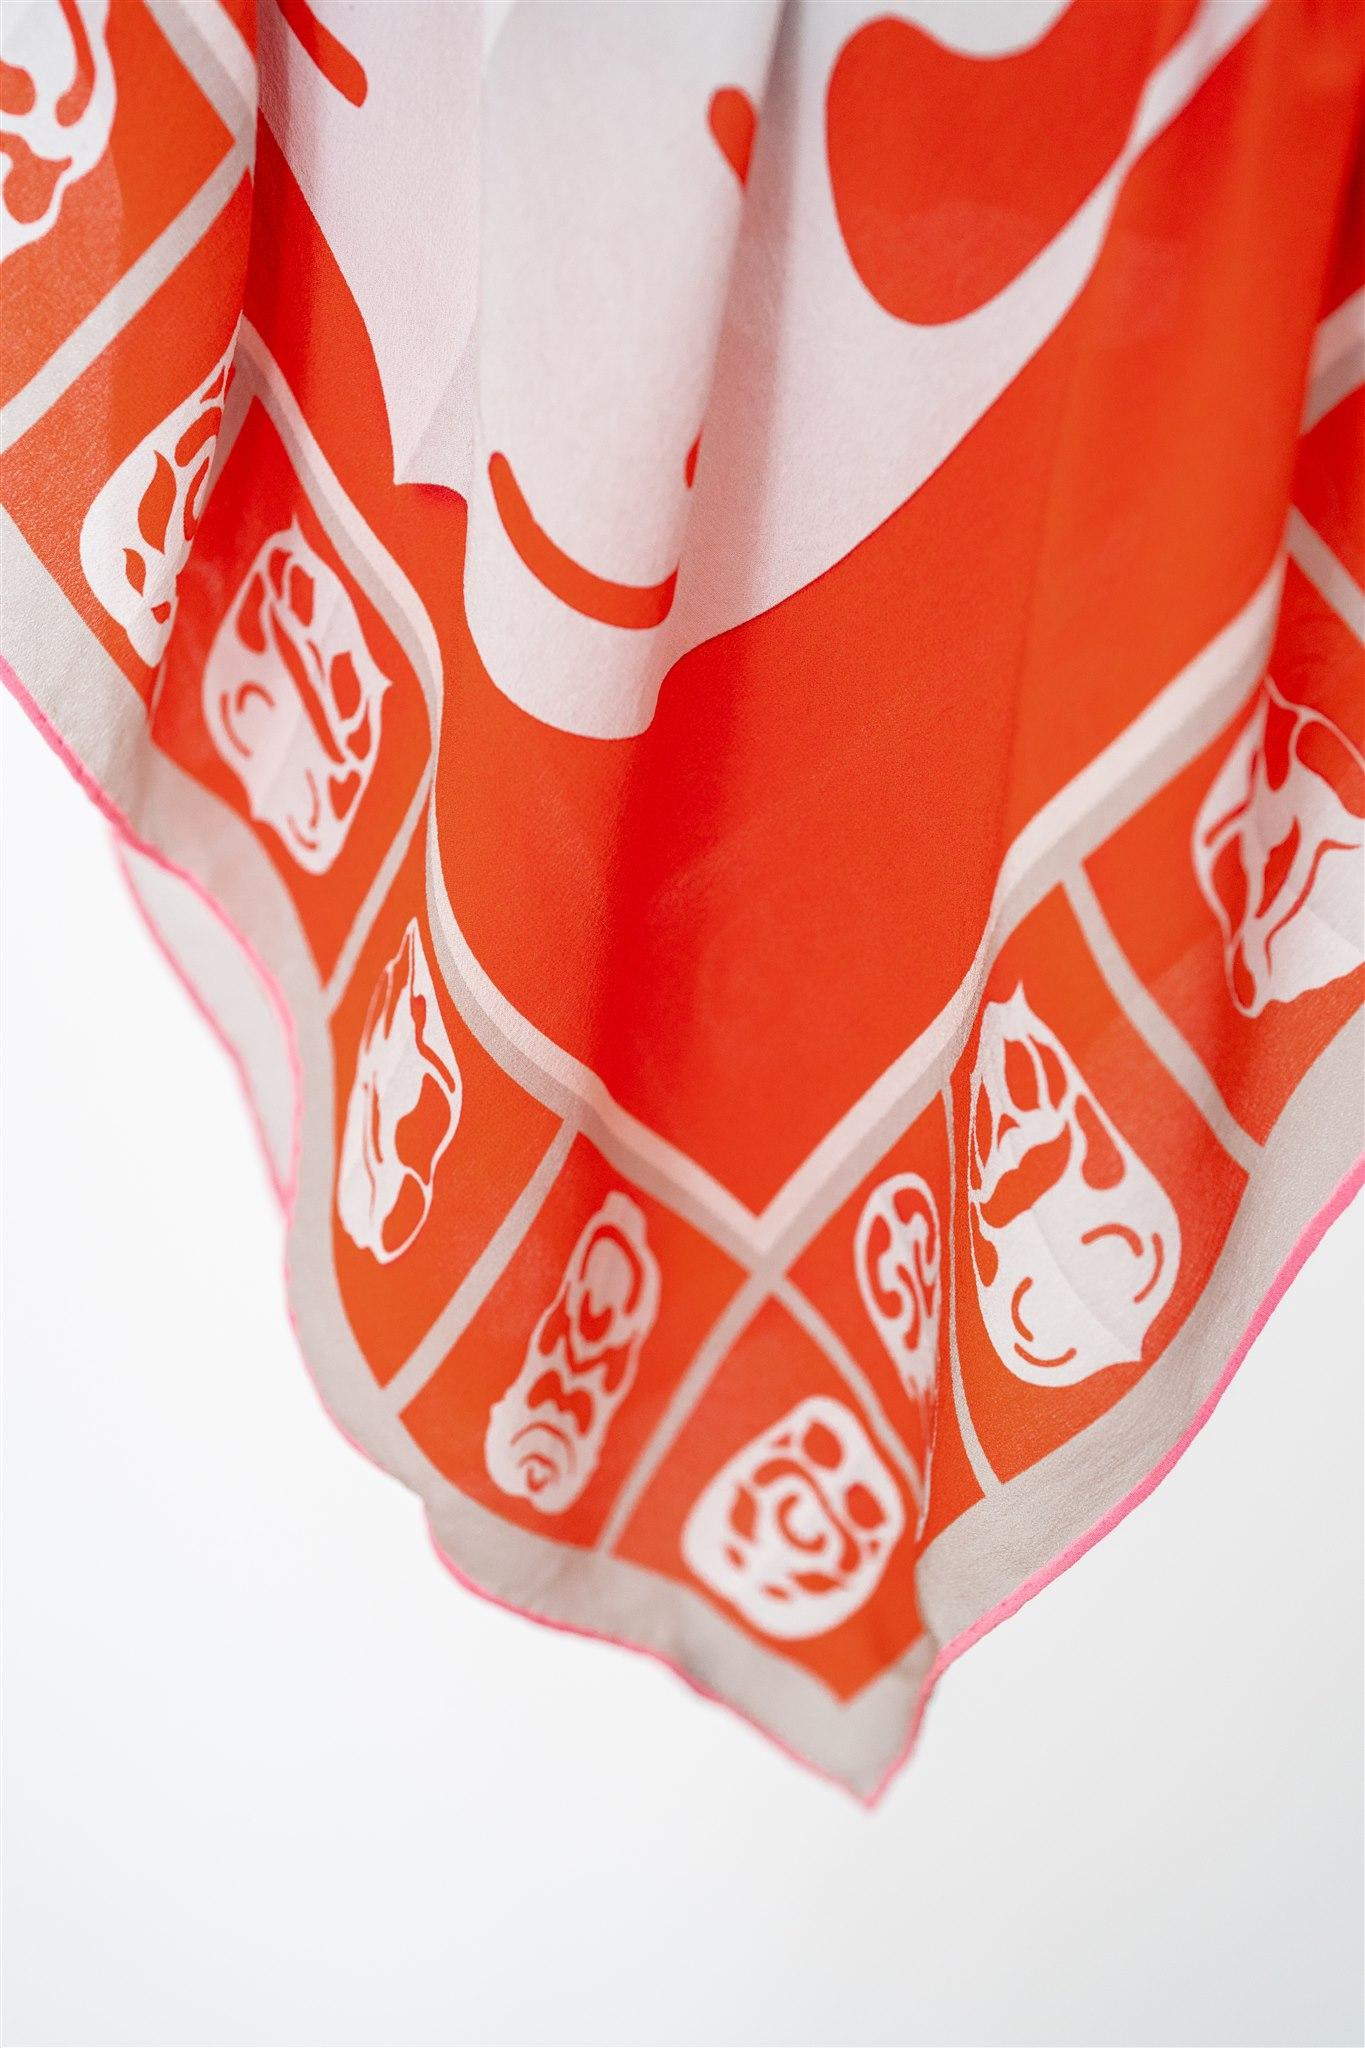 This Orange and Pink Silk Scarf is printed with a japanese-style paper cutting motif. The japanese-style paper cutting motif is derived from the Edition 